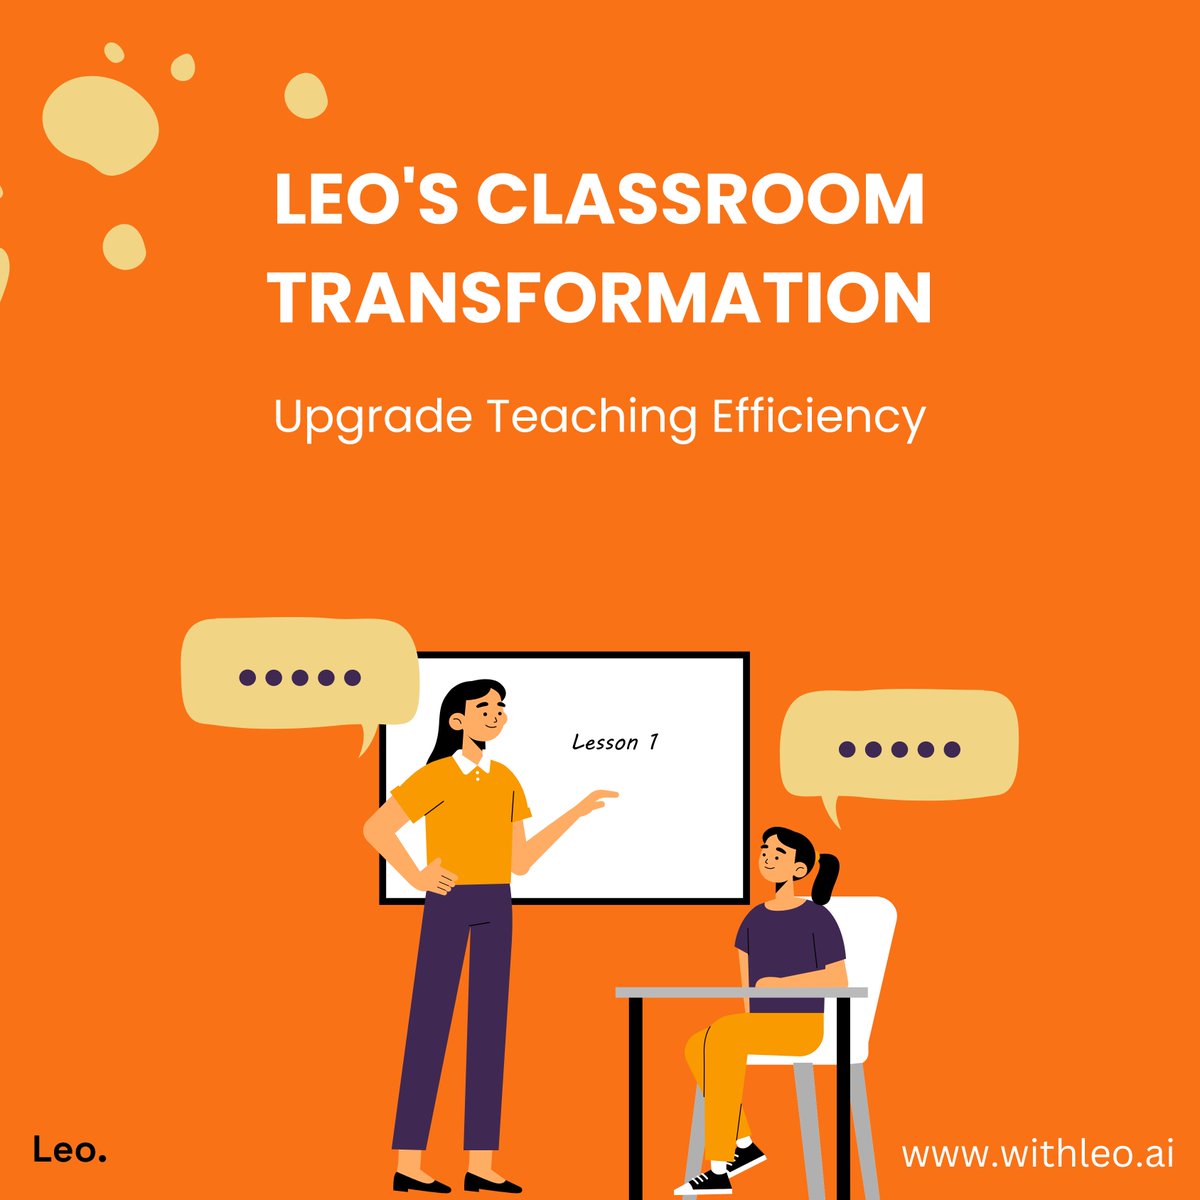 Revolutionize teaching with Leo: automate grading, personalize feedback, and save time. Join now at withleo.ai for a rewarding classroom experience.

#AI #edtech #education #teaching #AIinEducation #TeacherTools #TeachingAssistants #EducationalAI